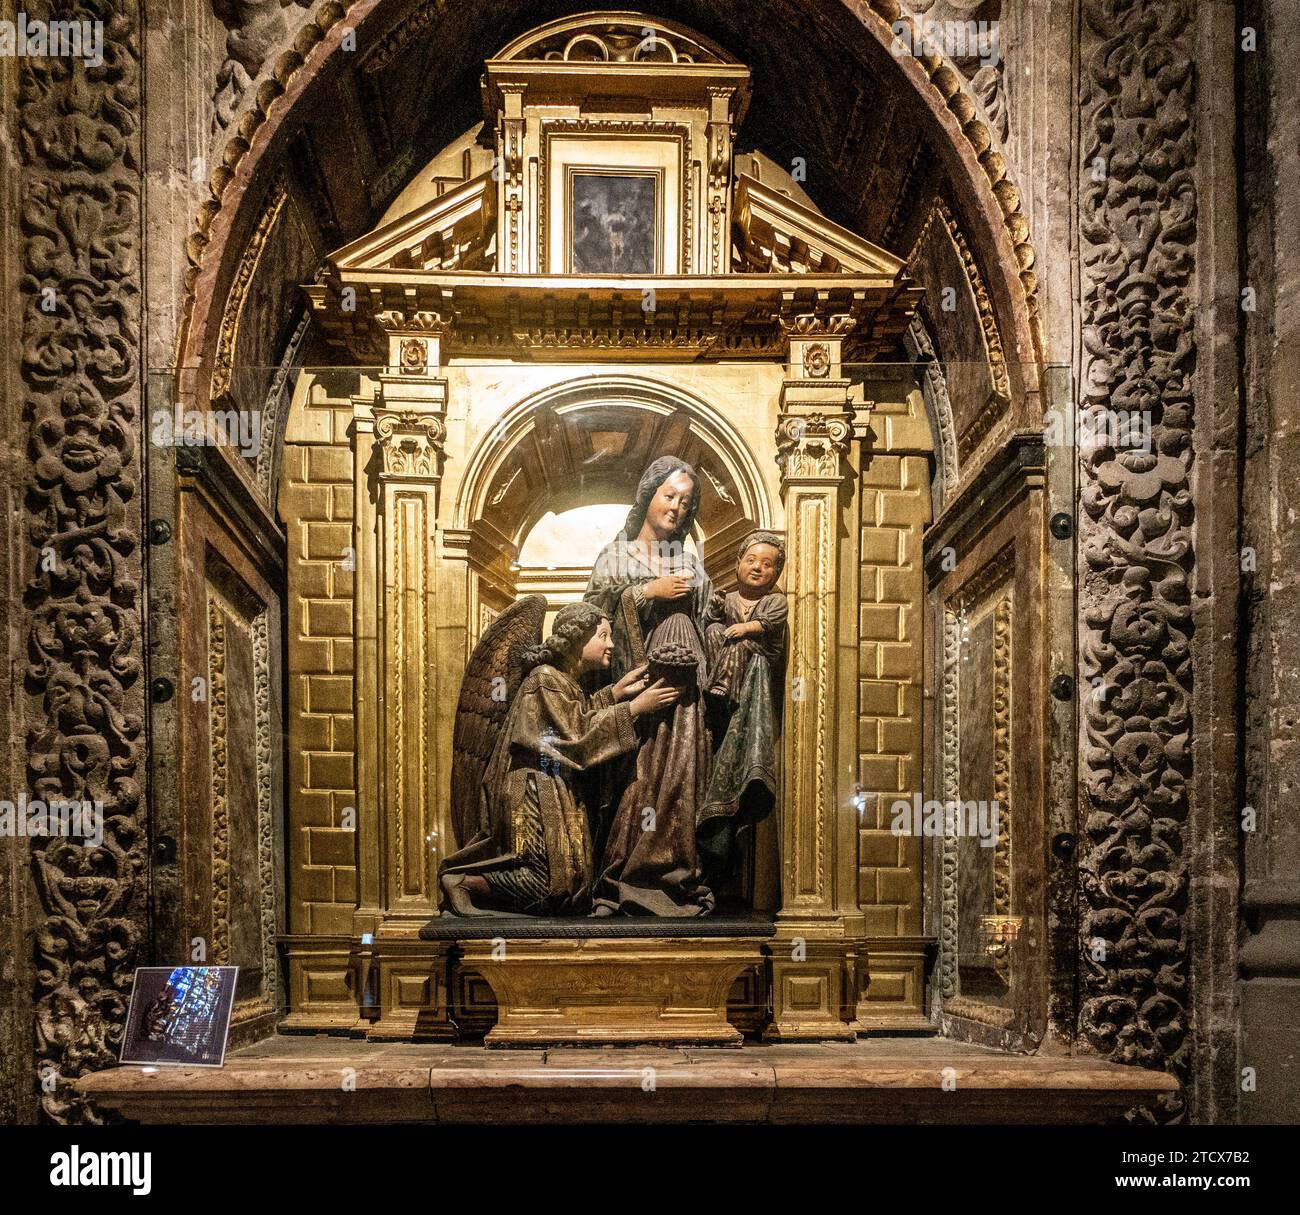 A sculptural group shows the Virgin Mary breastfeeding her Son, while Jesus looks back at the viewer.Displayed in Seville Cathedral,Spain. Stock Photo